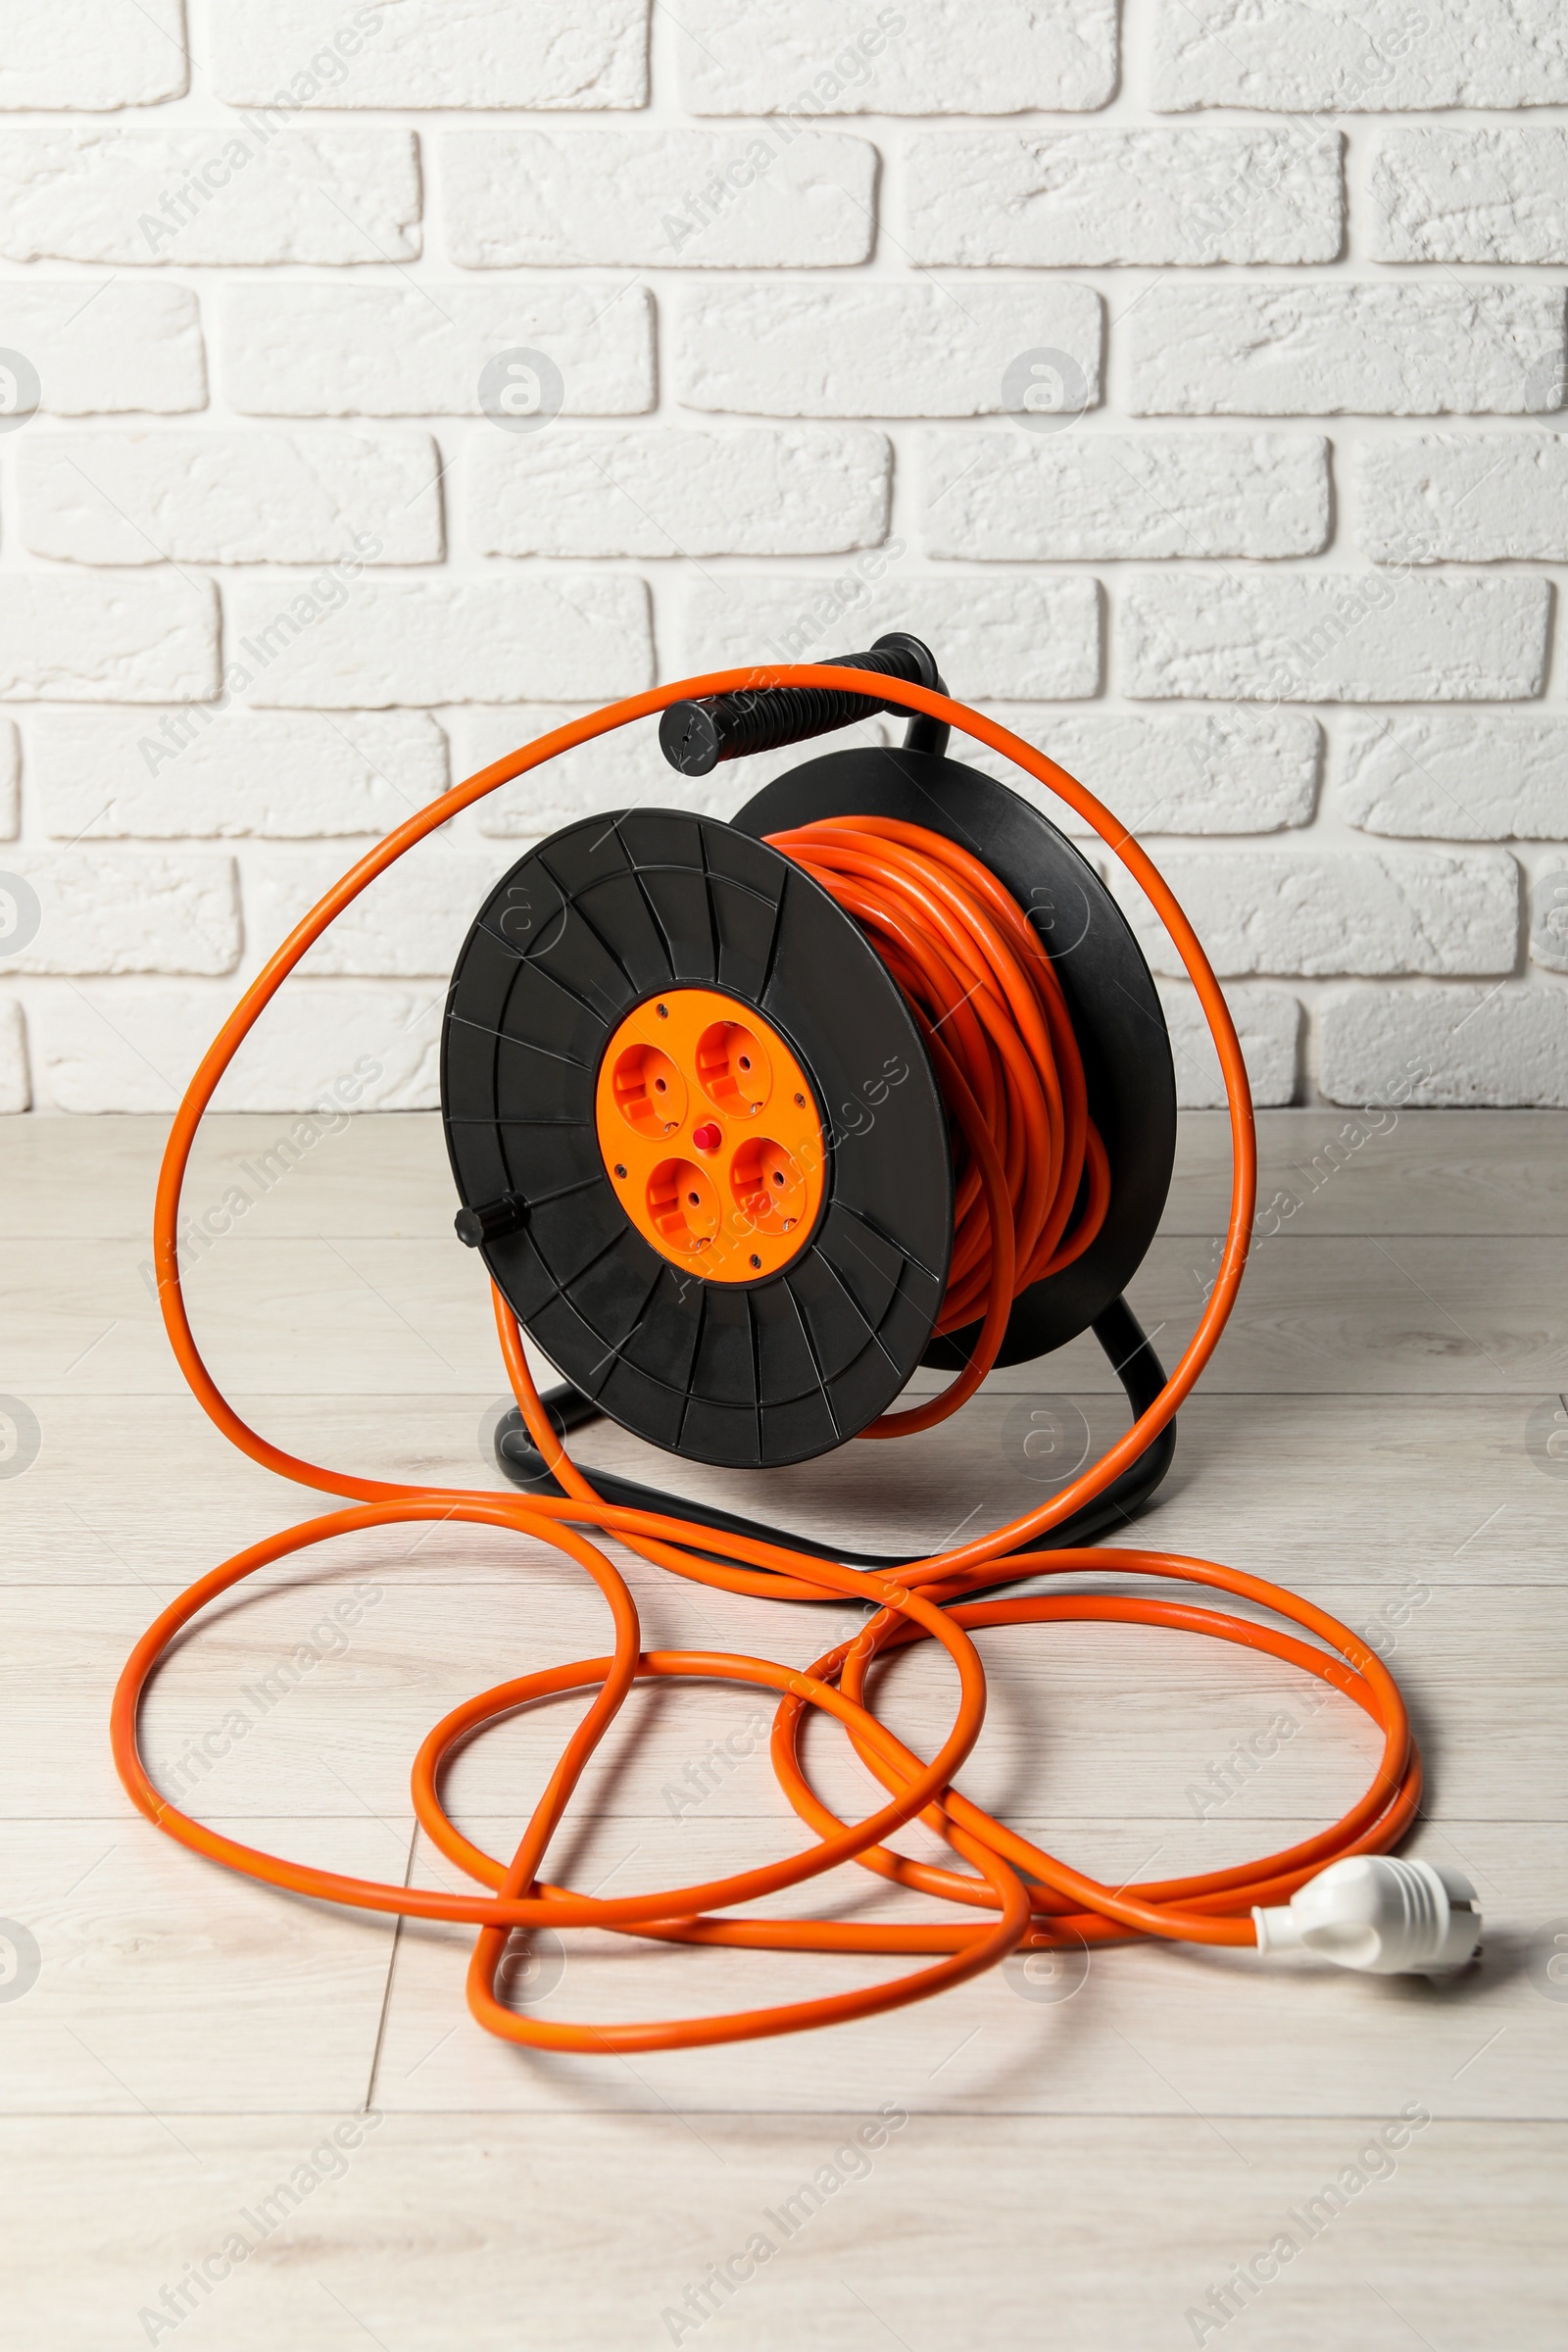 Photo of Extension cord reel on floor near white brick wall. Electrician's equipment